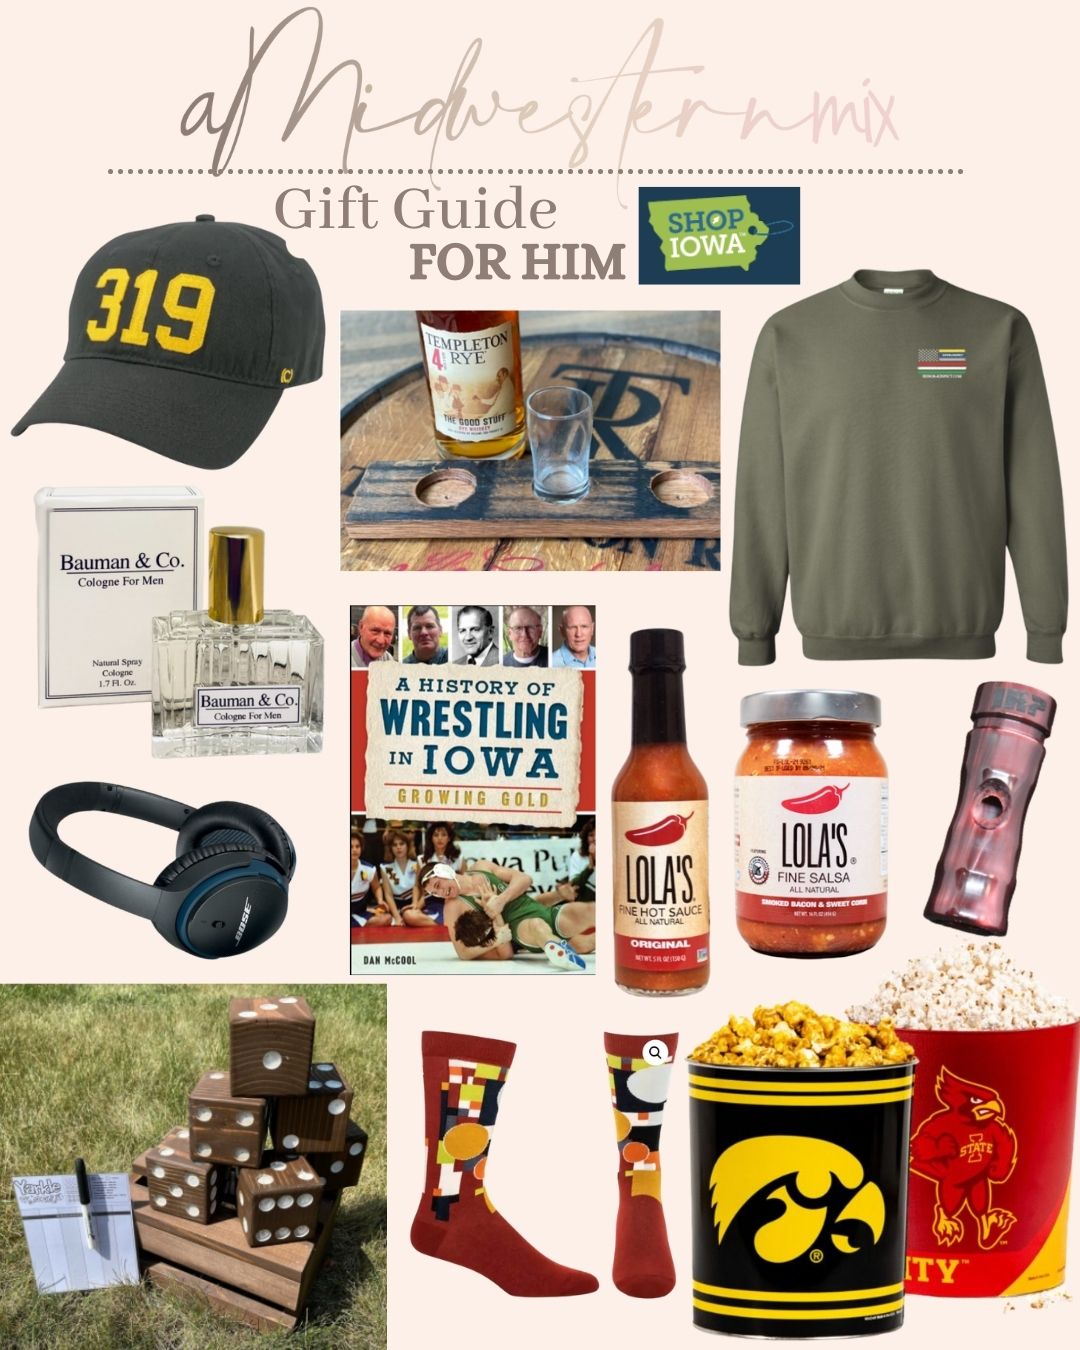 Gift Guide with Shop Iowa